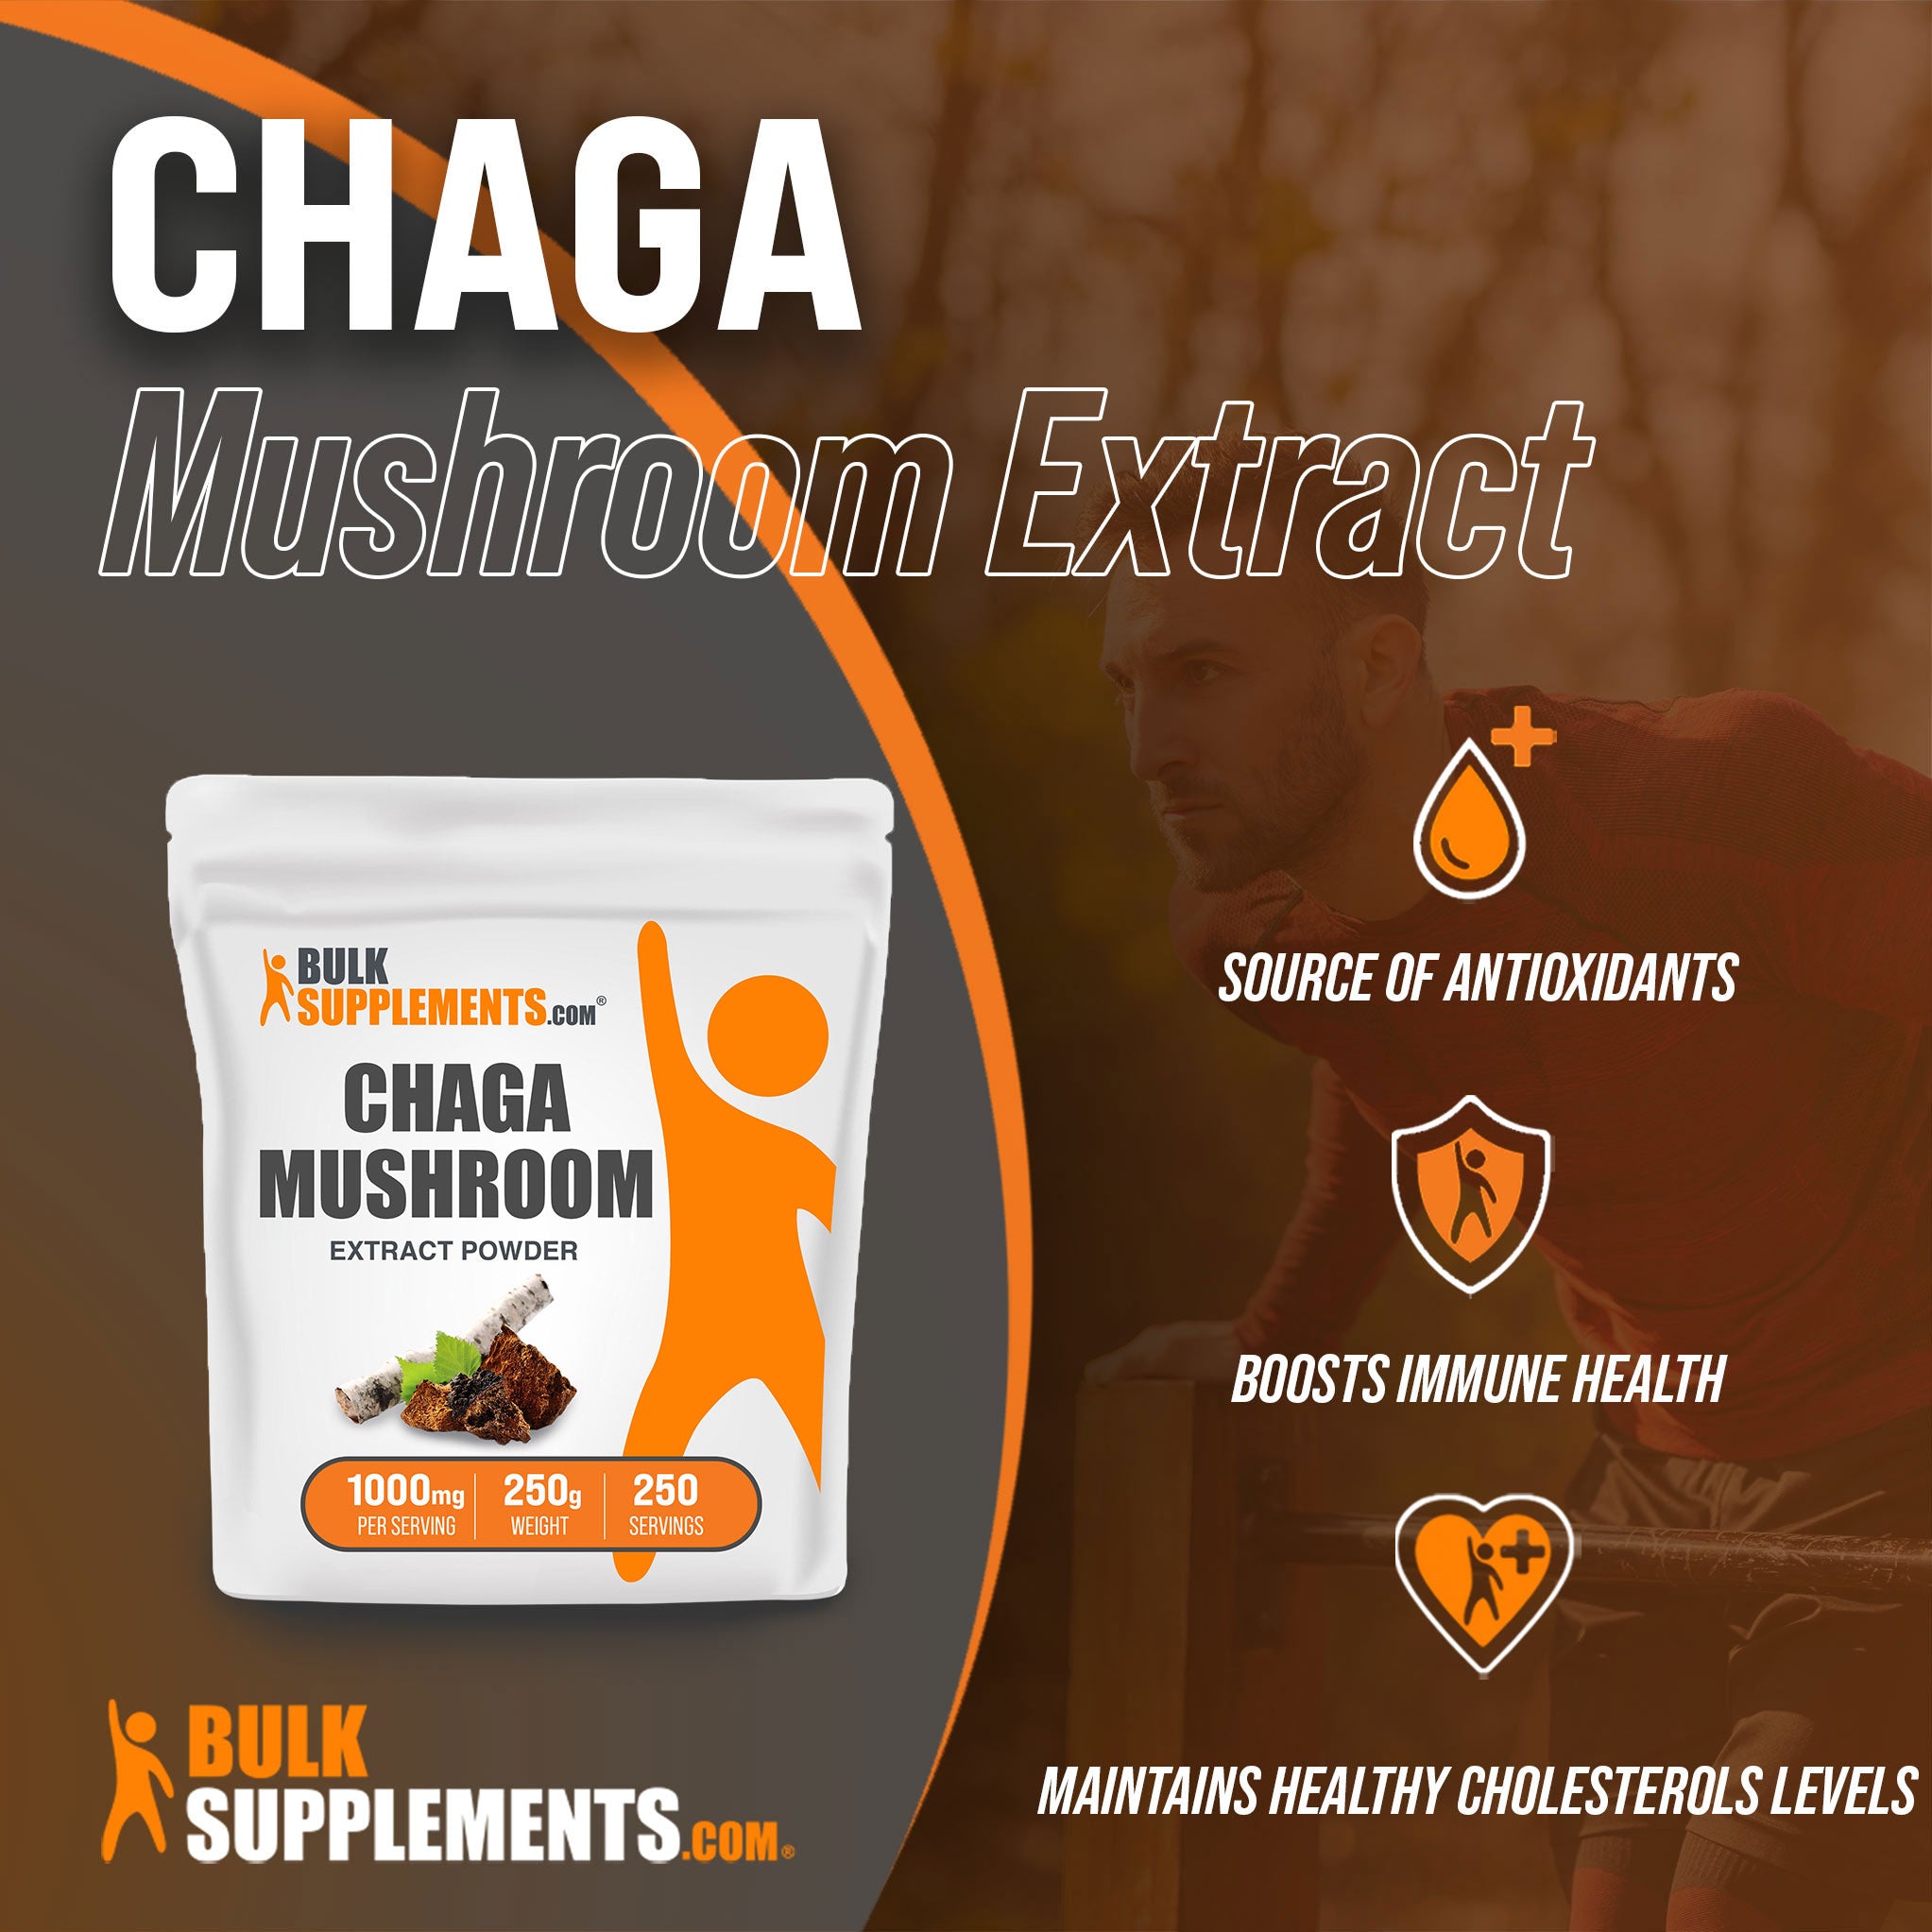 Benefits of Chaga Mushroom Extract; source of antioxidants, boosts immune health, maintains healthy cholesterol levels